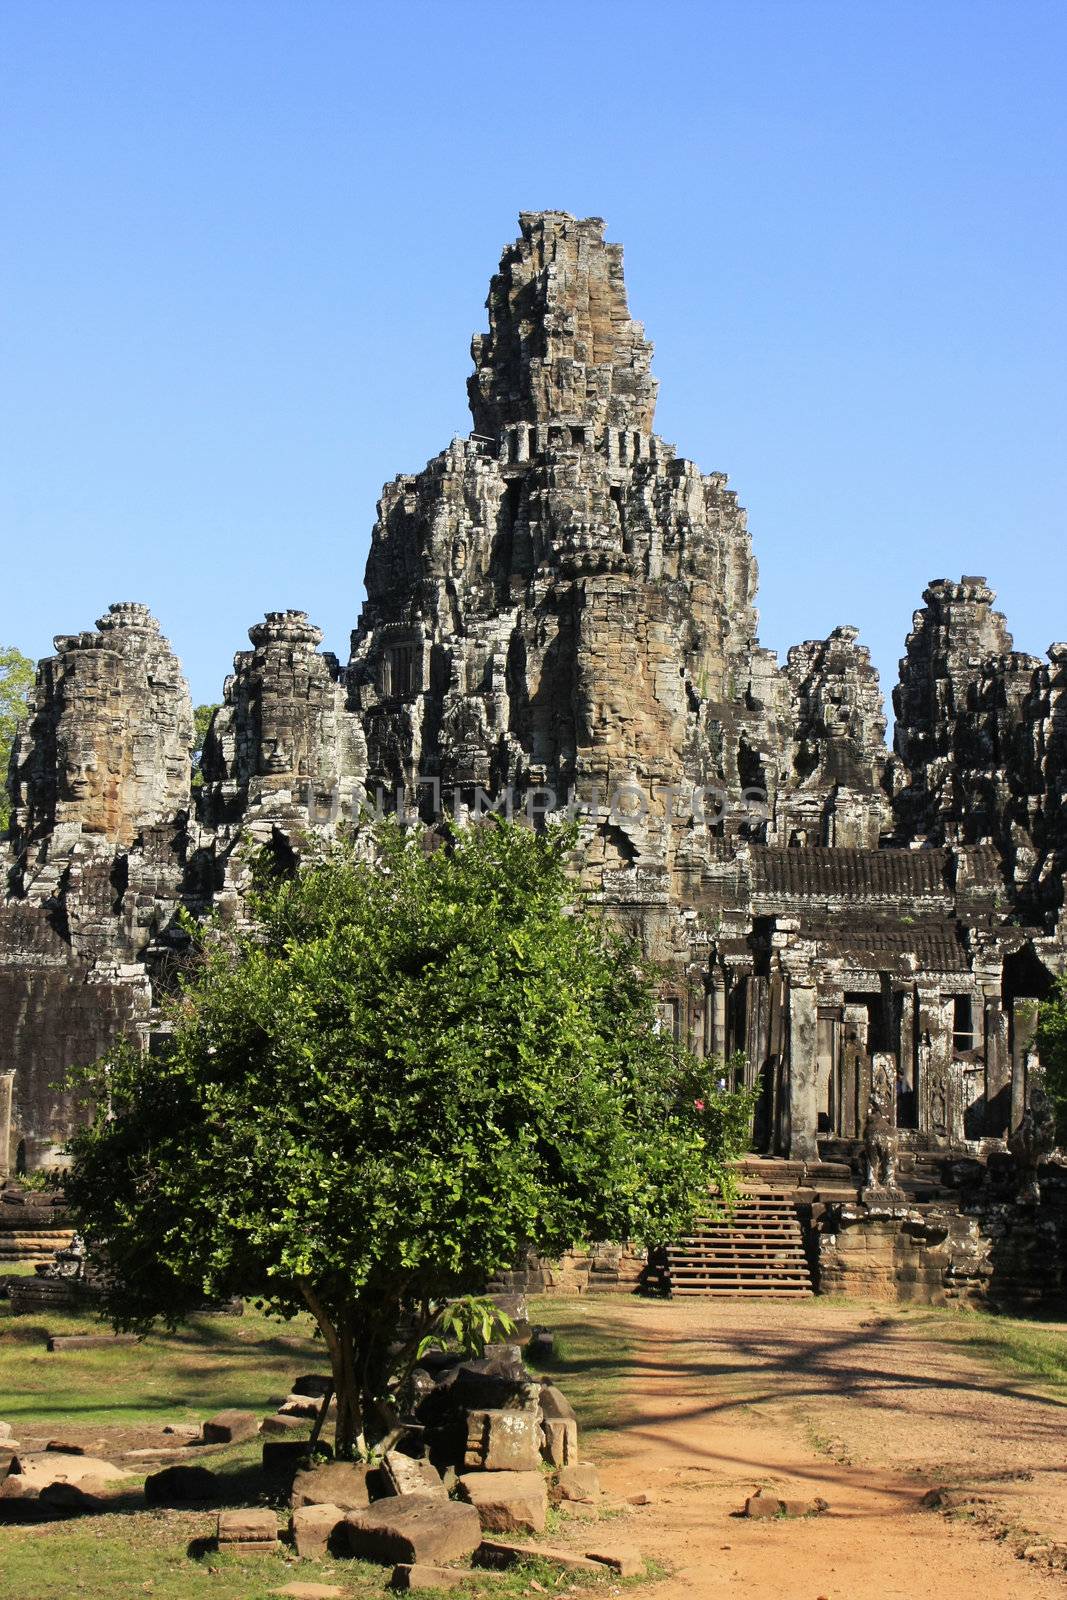 Bayon temple, Angkor area, Siem Reap, Cambodia by donya_nedomam